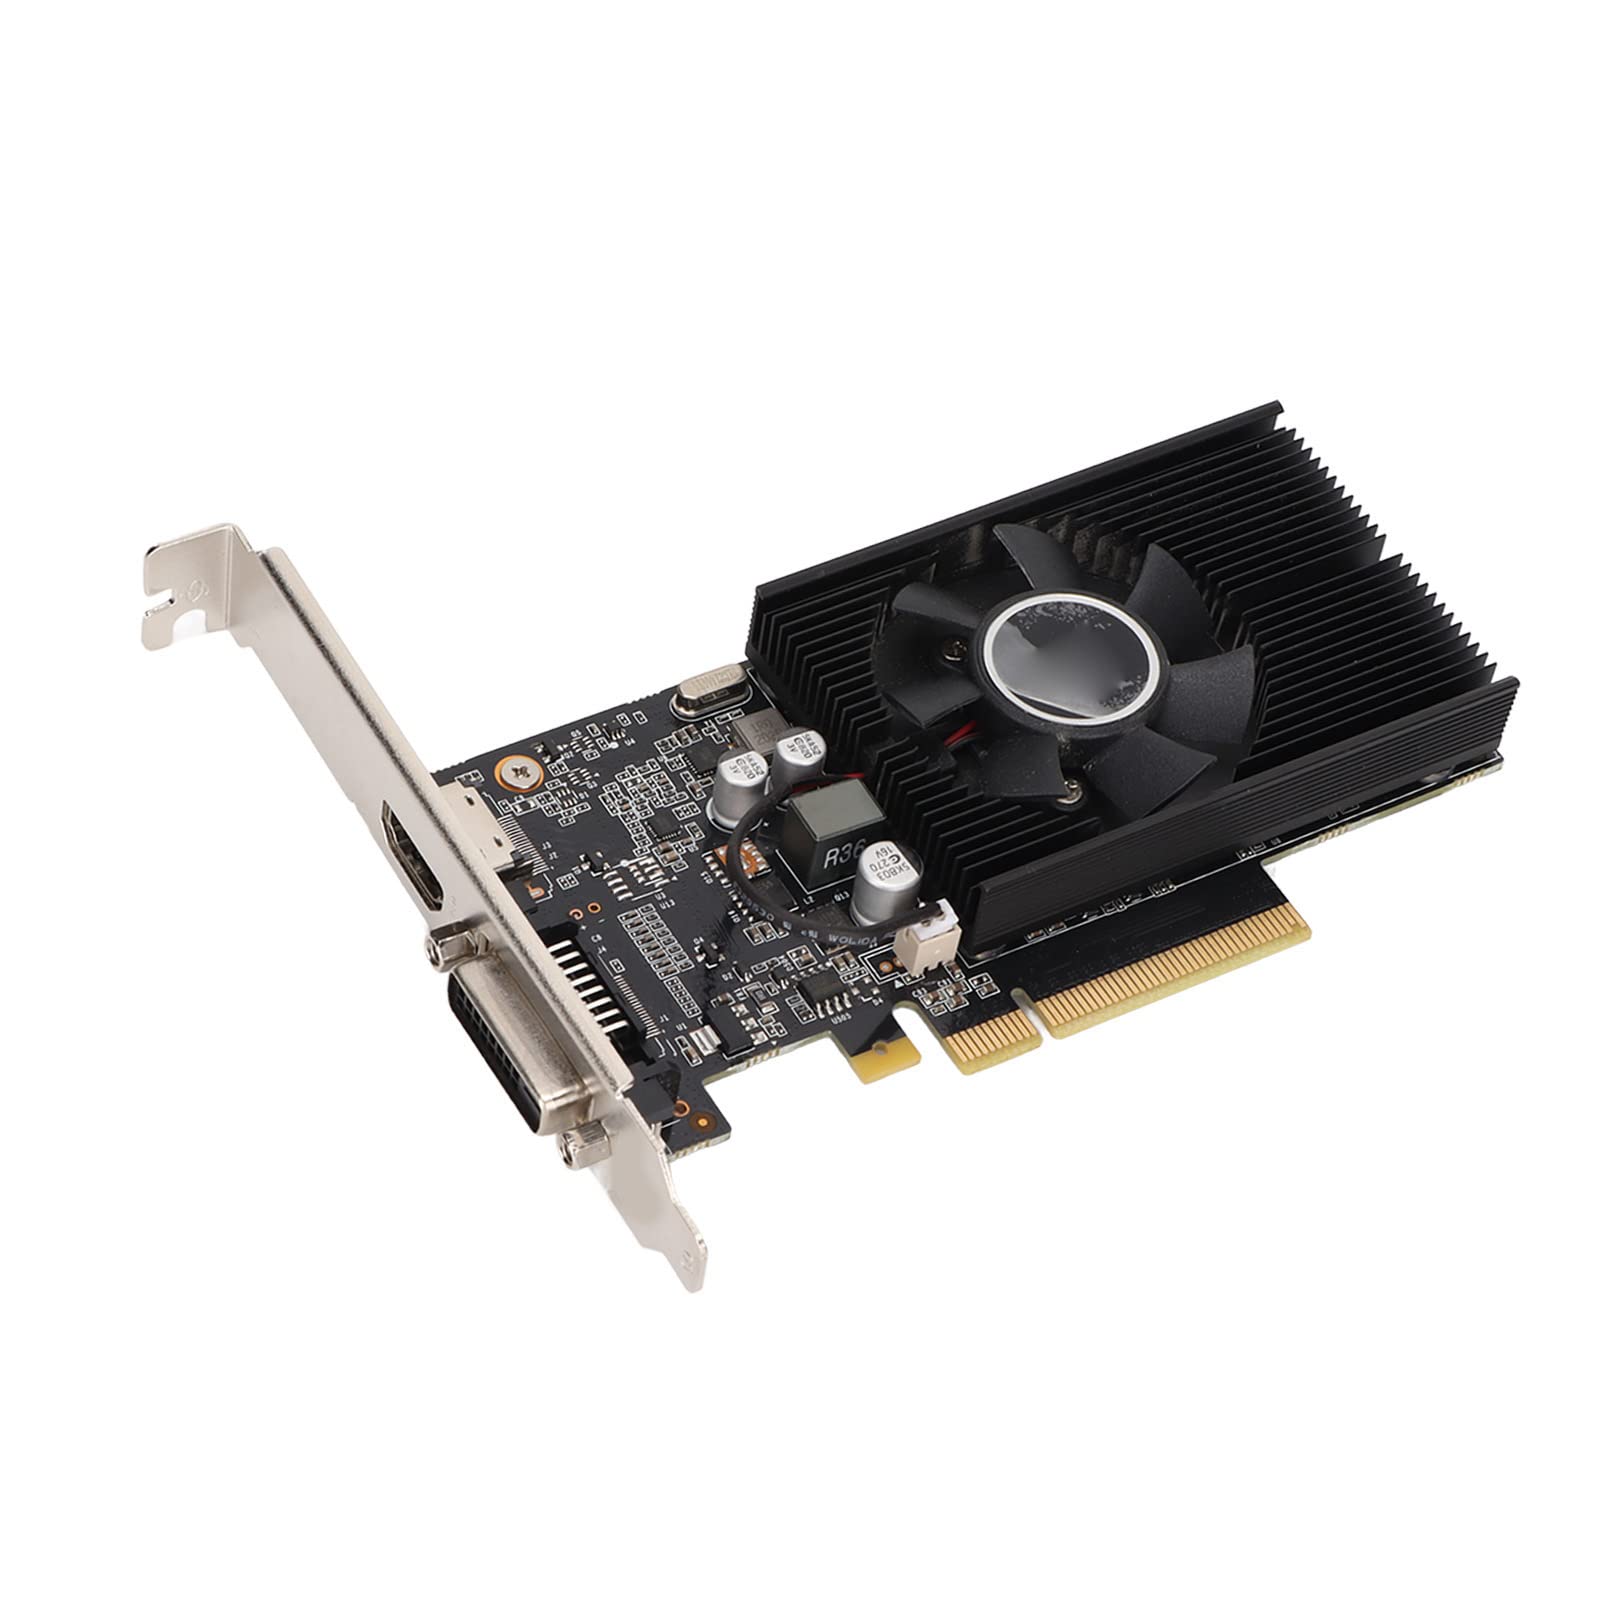 Dilwe GT1030 4GB DDR4 Graphics Card 64bit Desktop Computer Game Video Graphics Card with Powerful Image Processing Capabilit